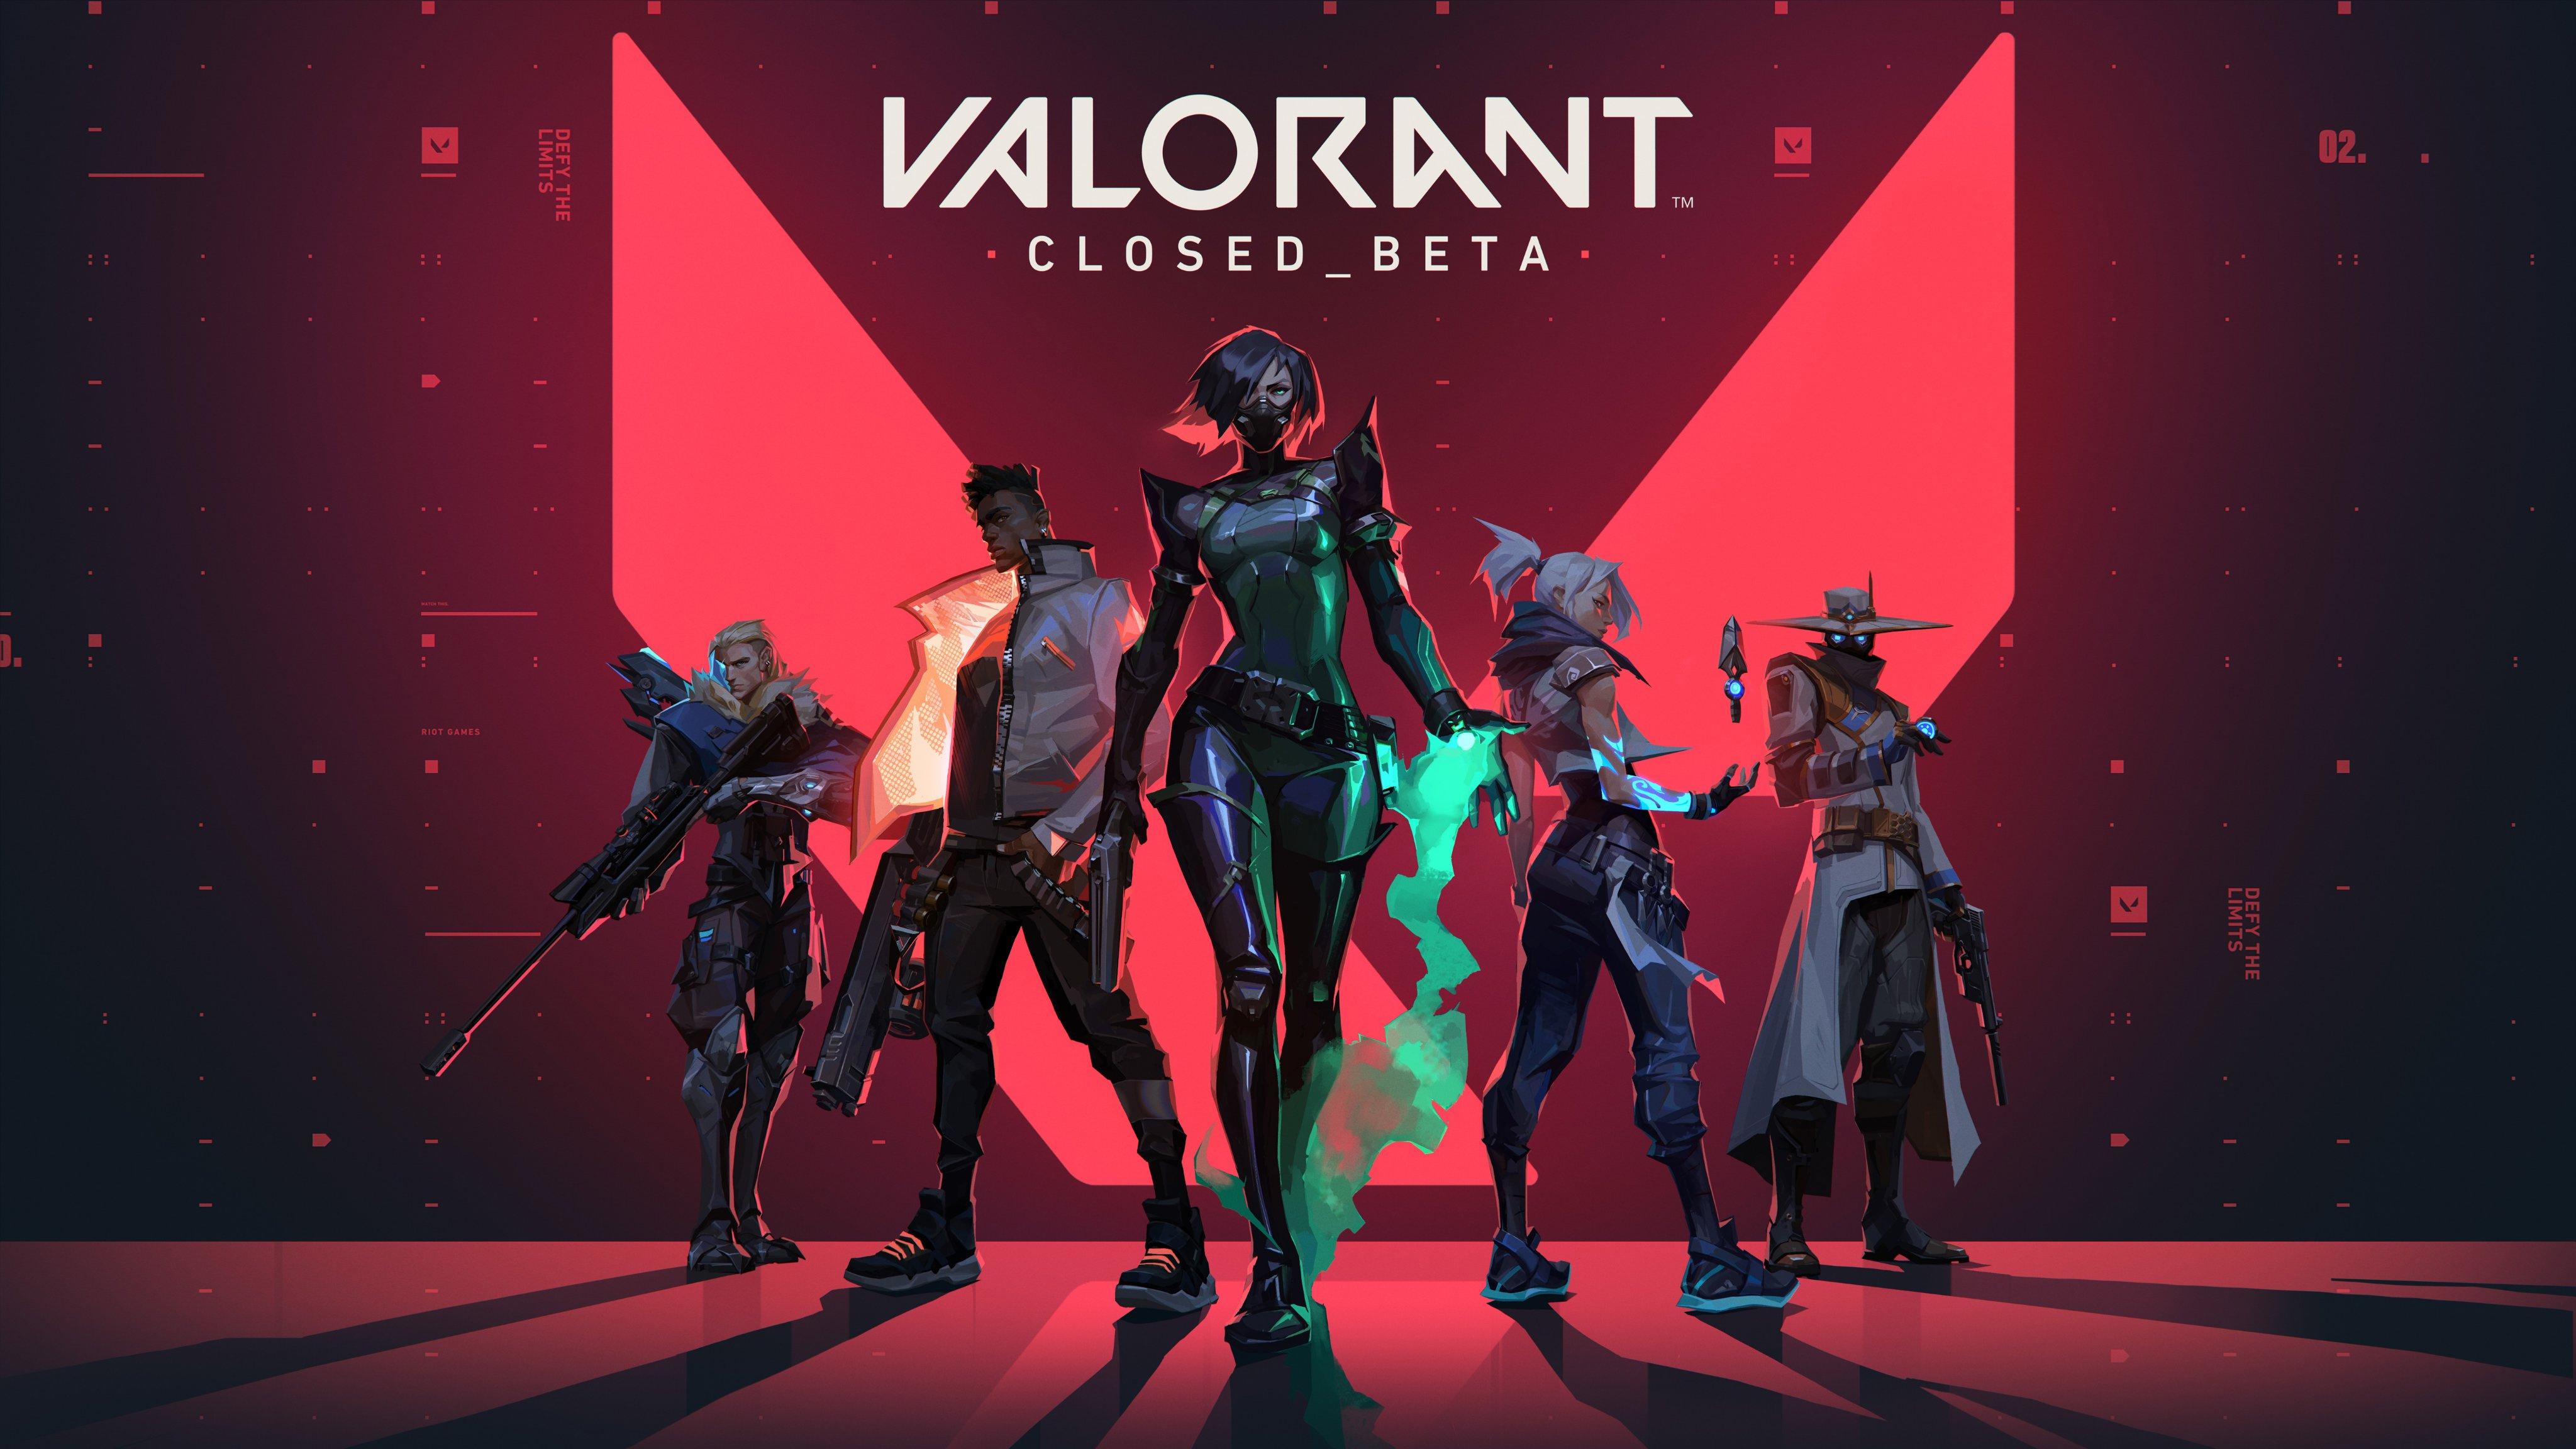 4096 x 2304 · jpeg - Valorant Closed Beta 2020, HD Games, 4k Wallpapers, Images, Backgrounds ...